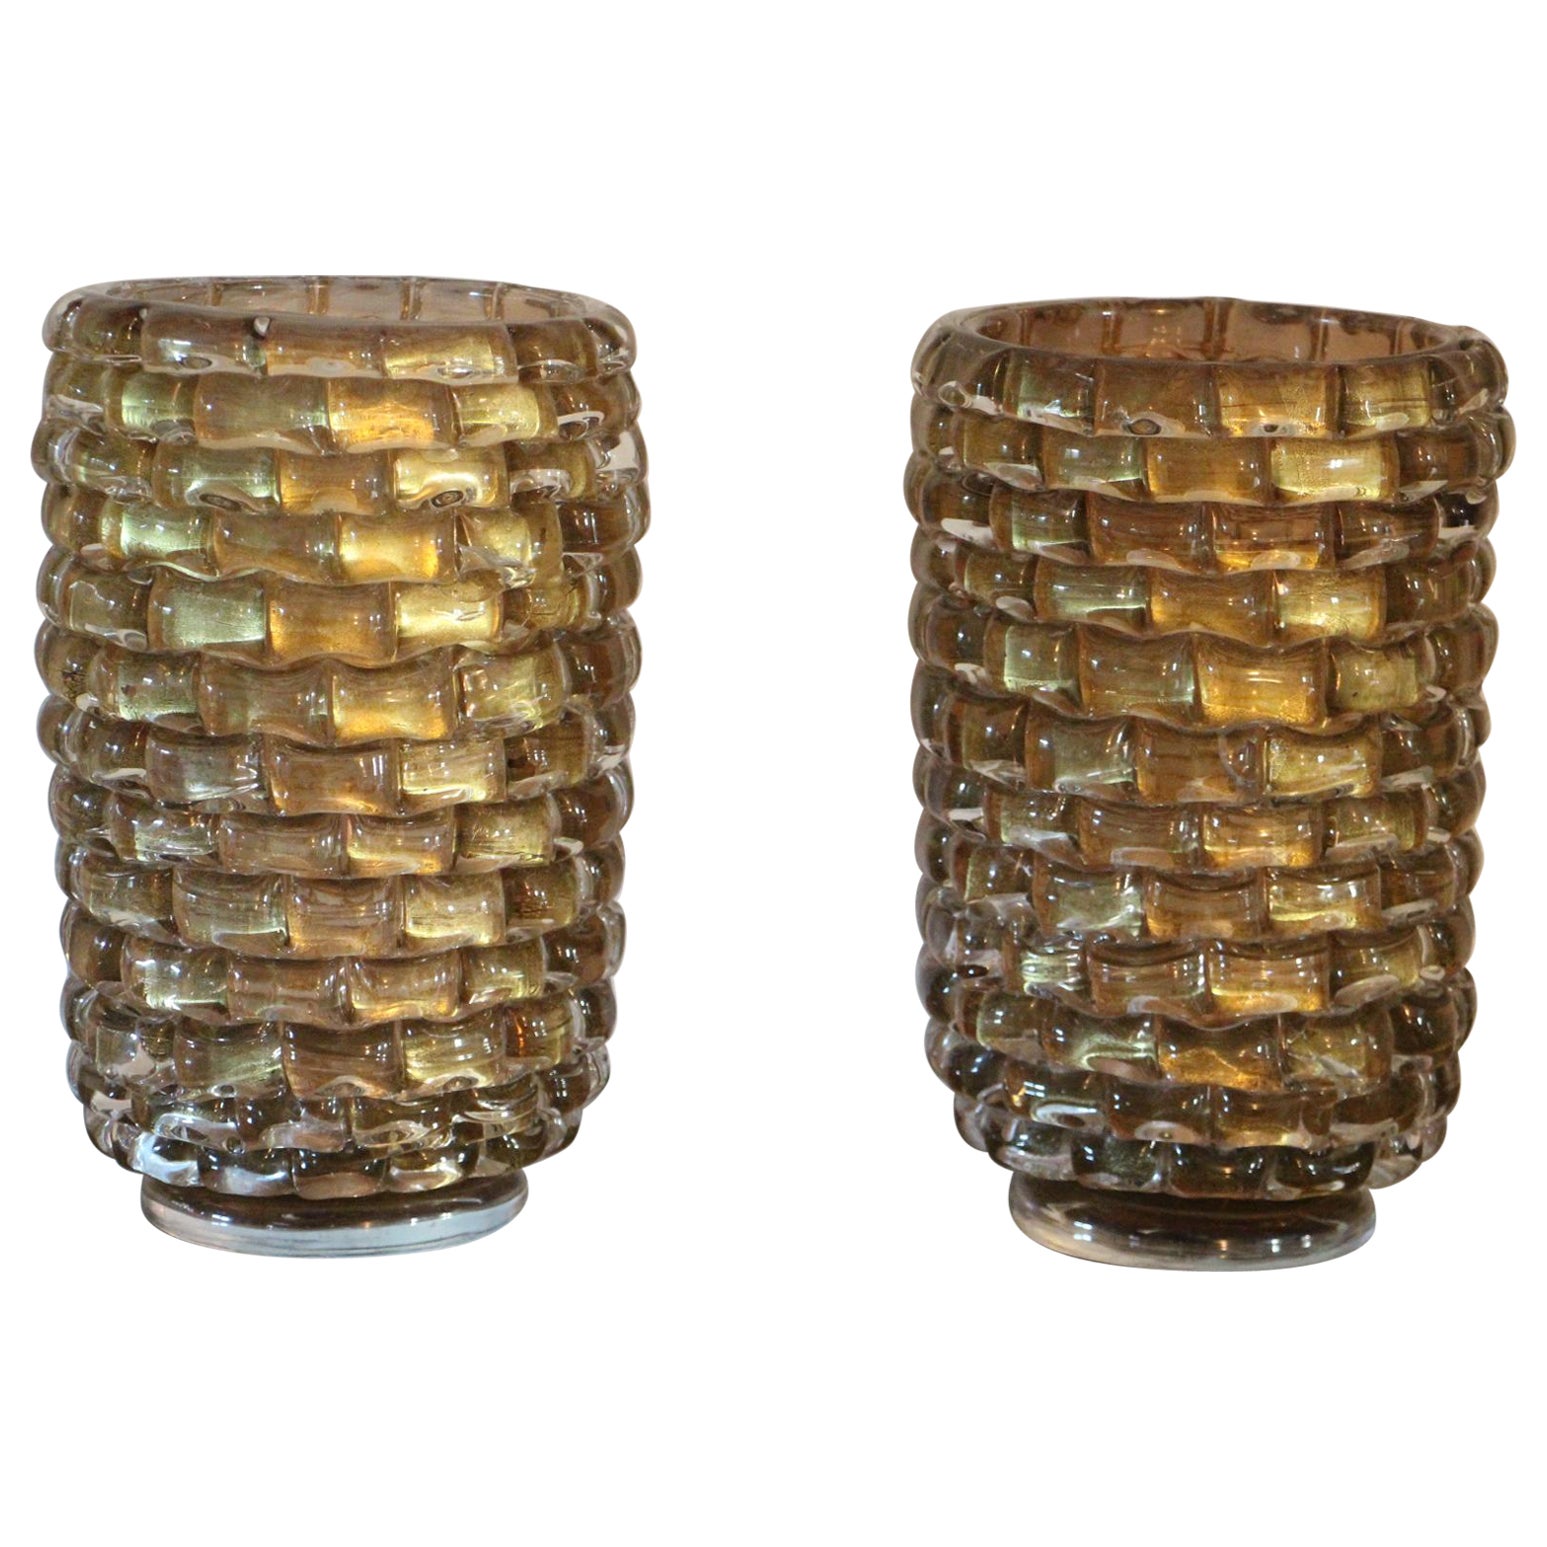 Pair of Large Gold Color and Iridescent Murano Glass Vases